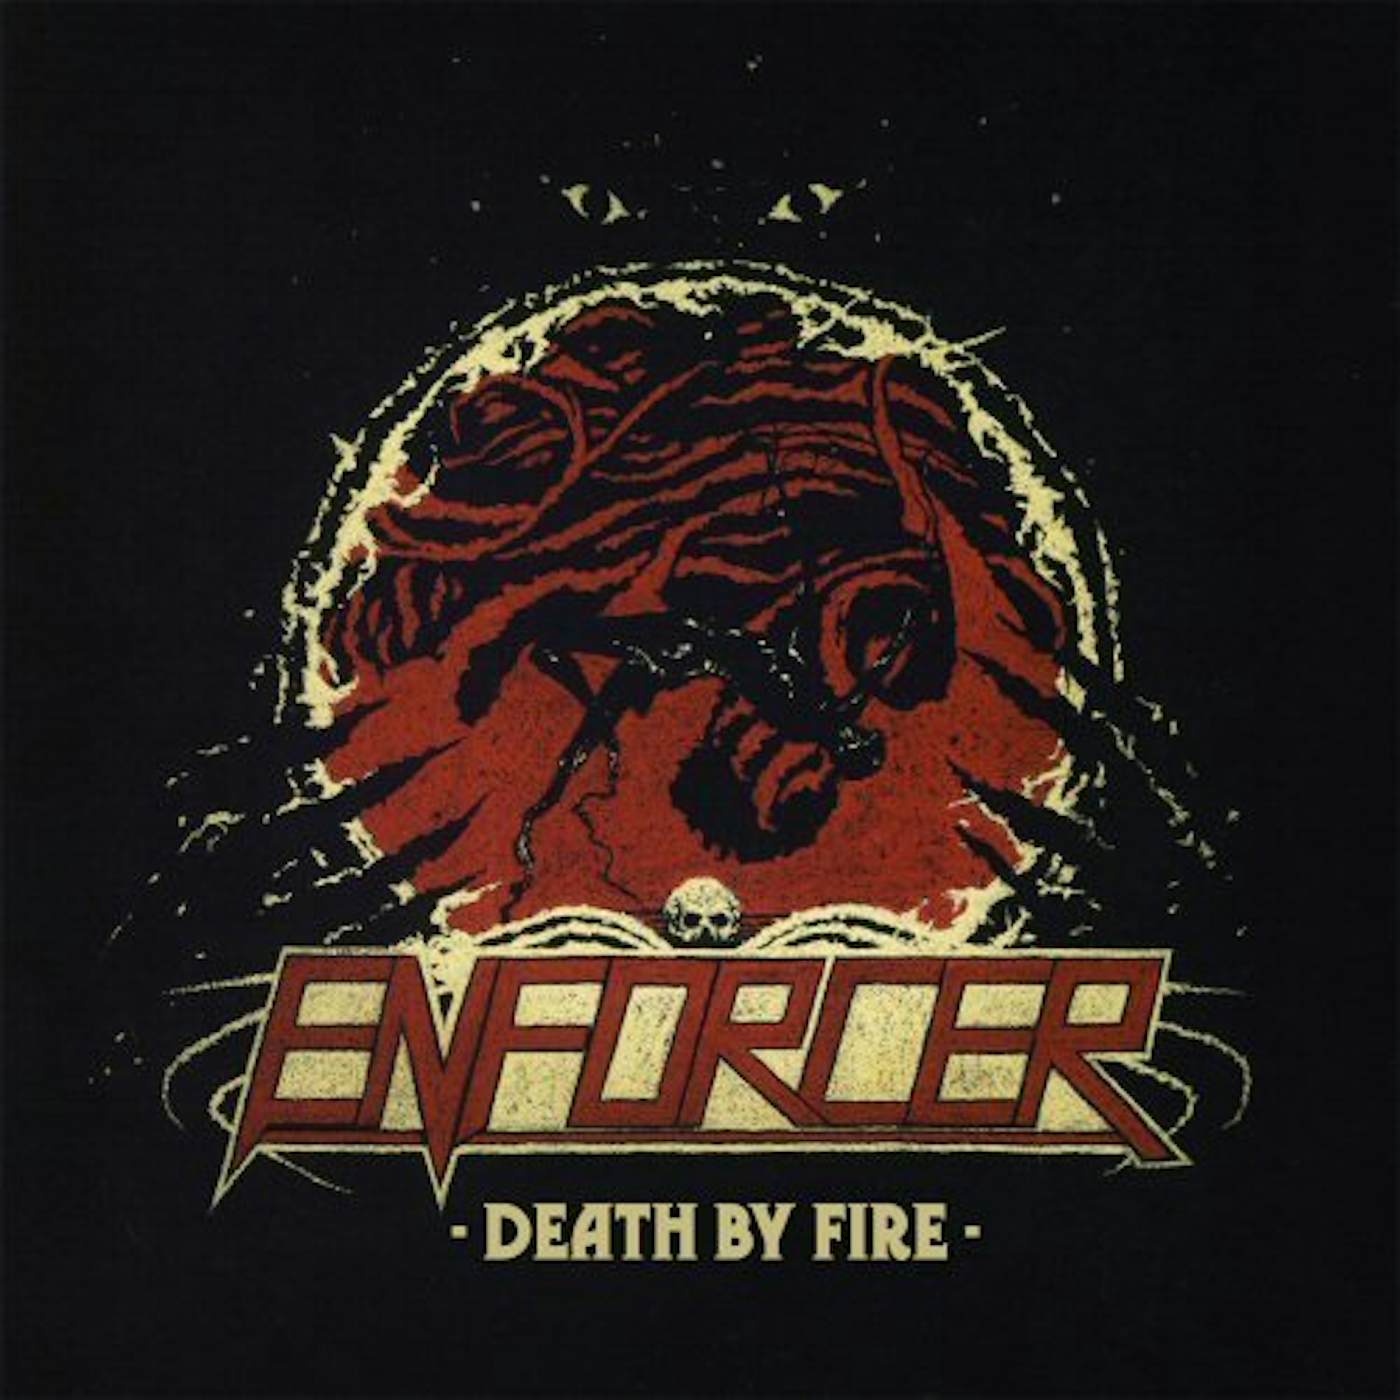 Enforcer Death By Fire Vinyl Record